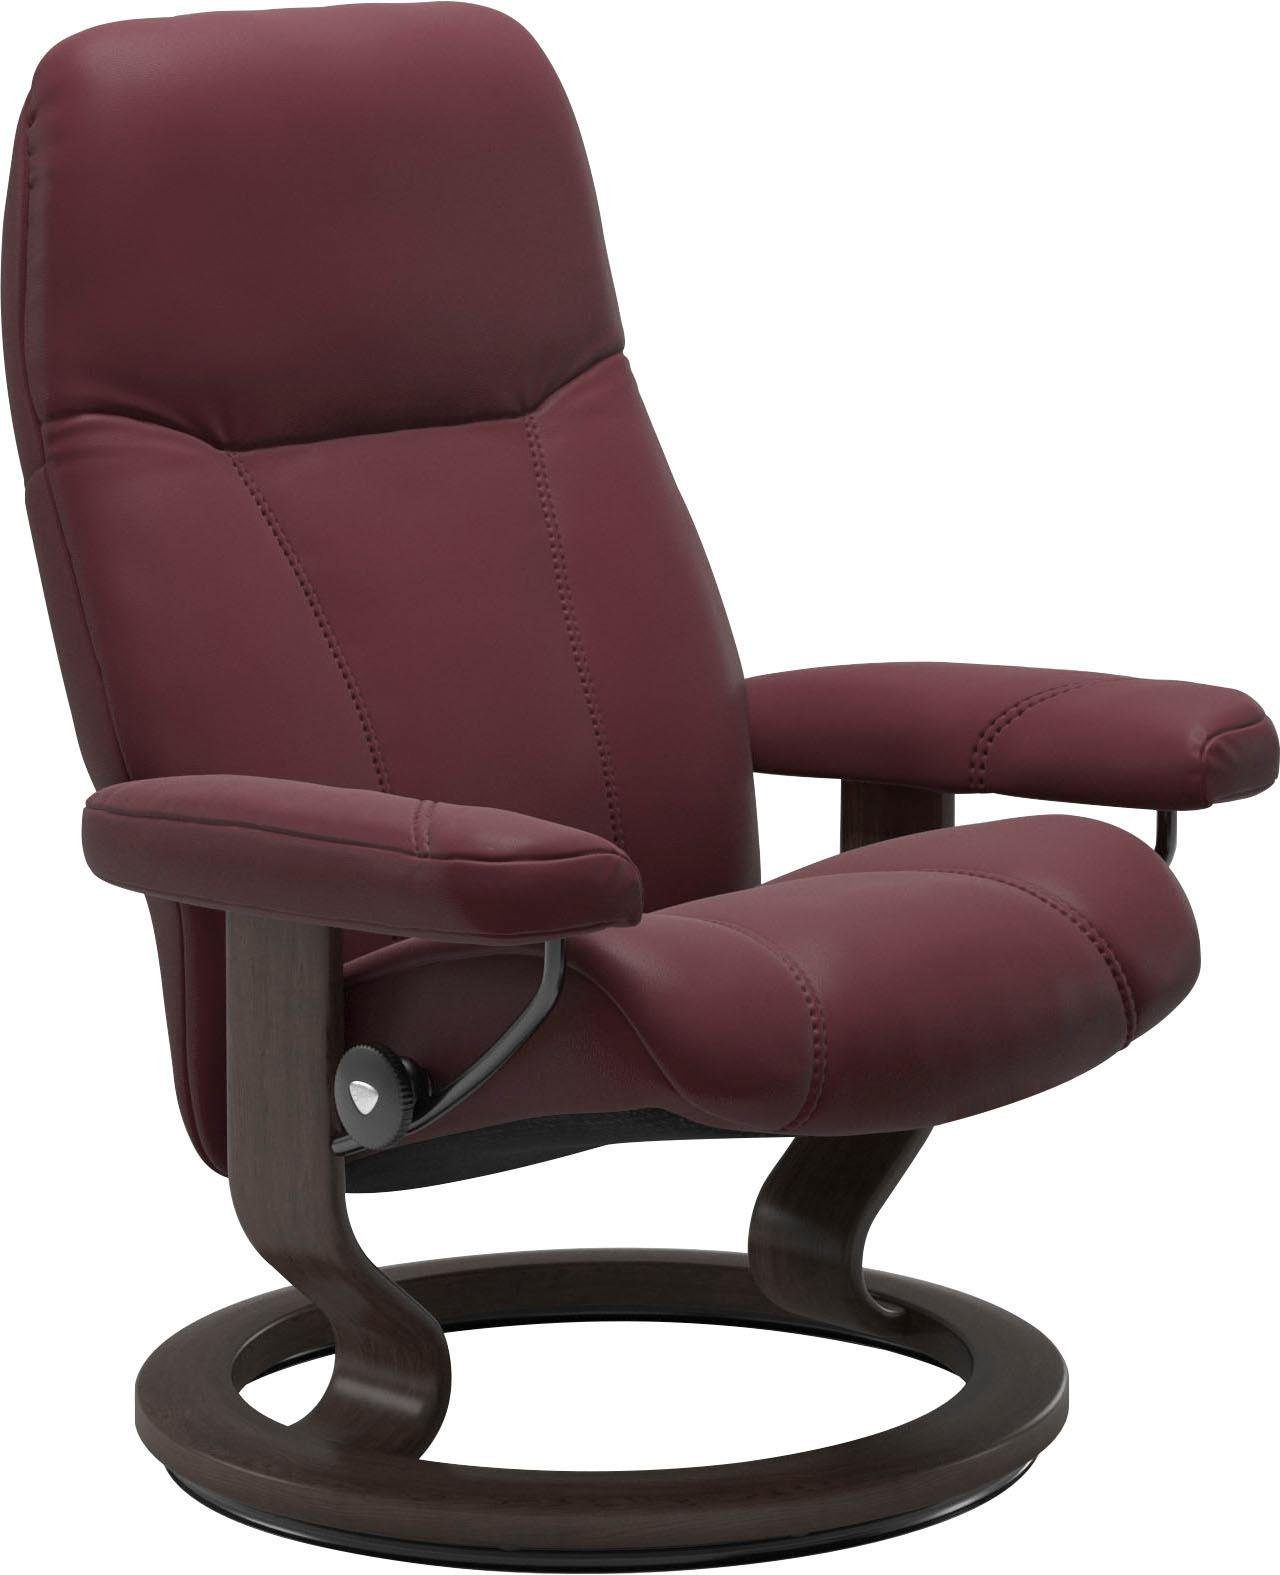 Wenge Größe Gestell Classic mit Relaxsessel Stressless® M, Consul, Base,